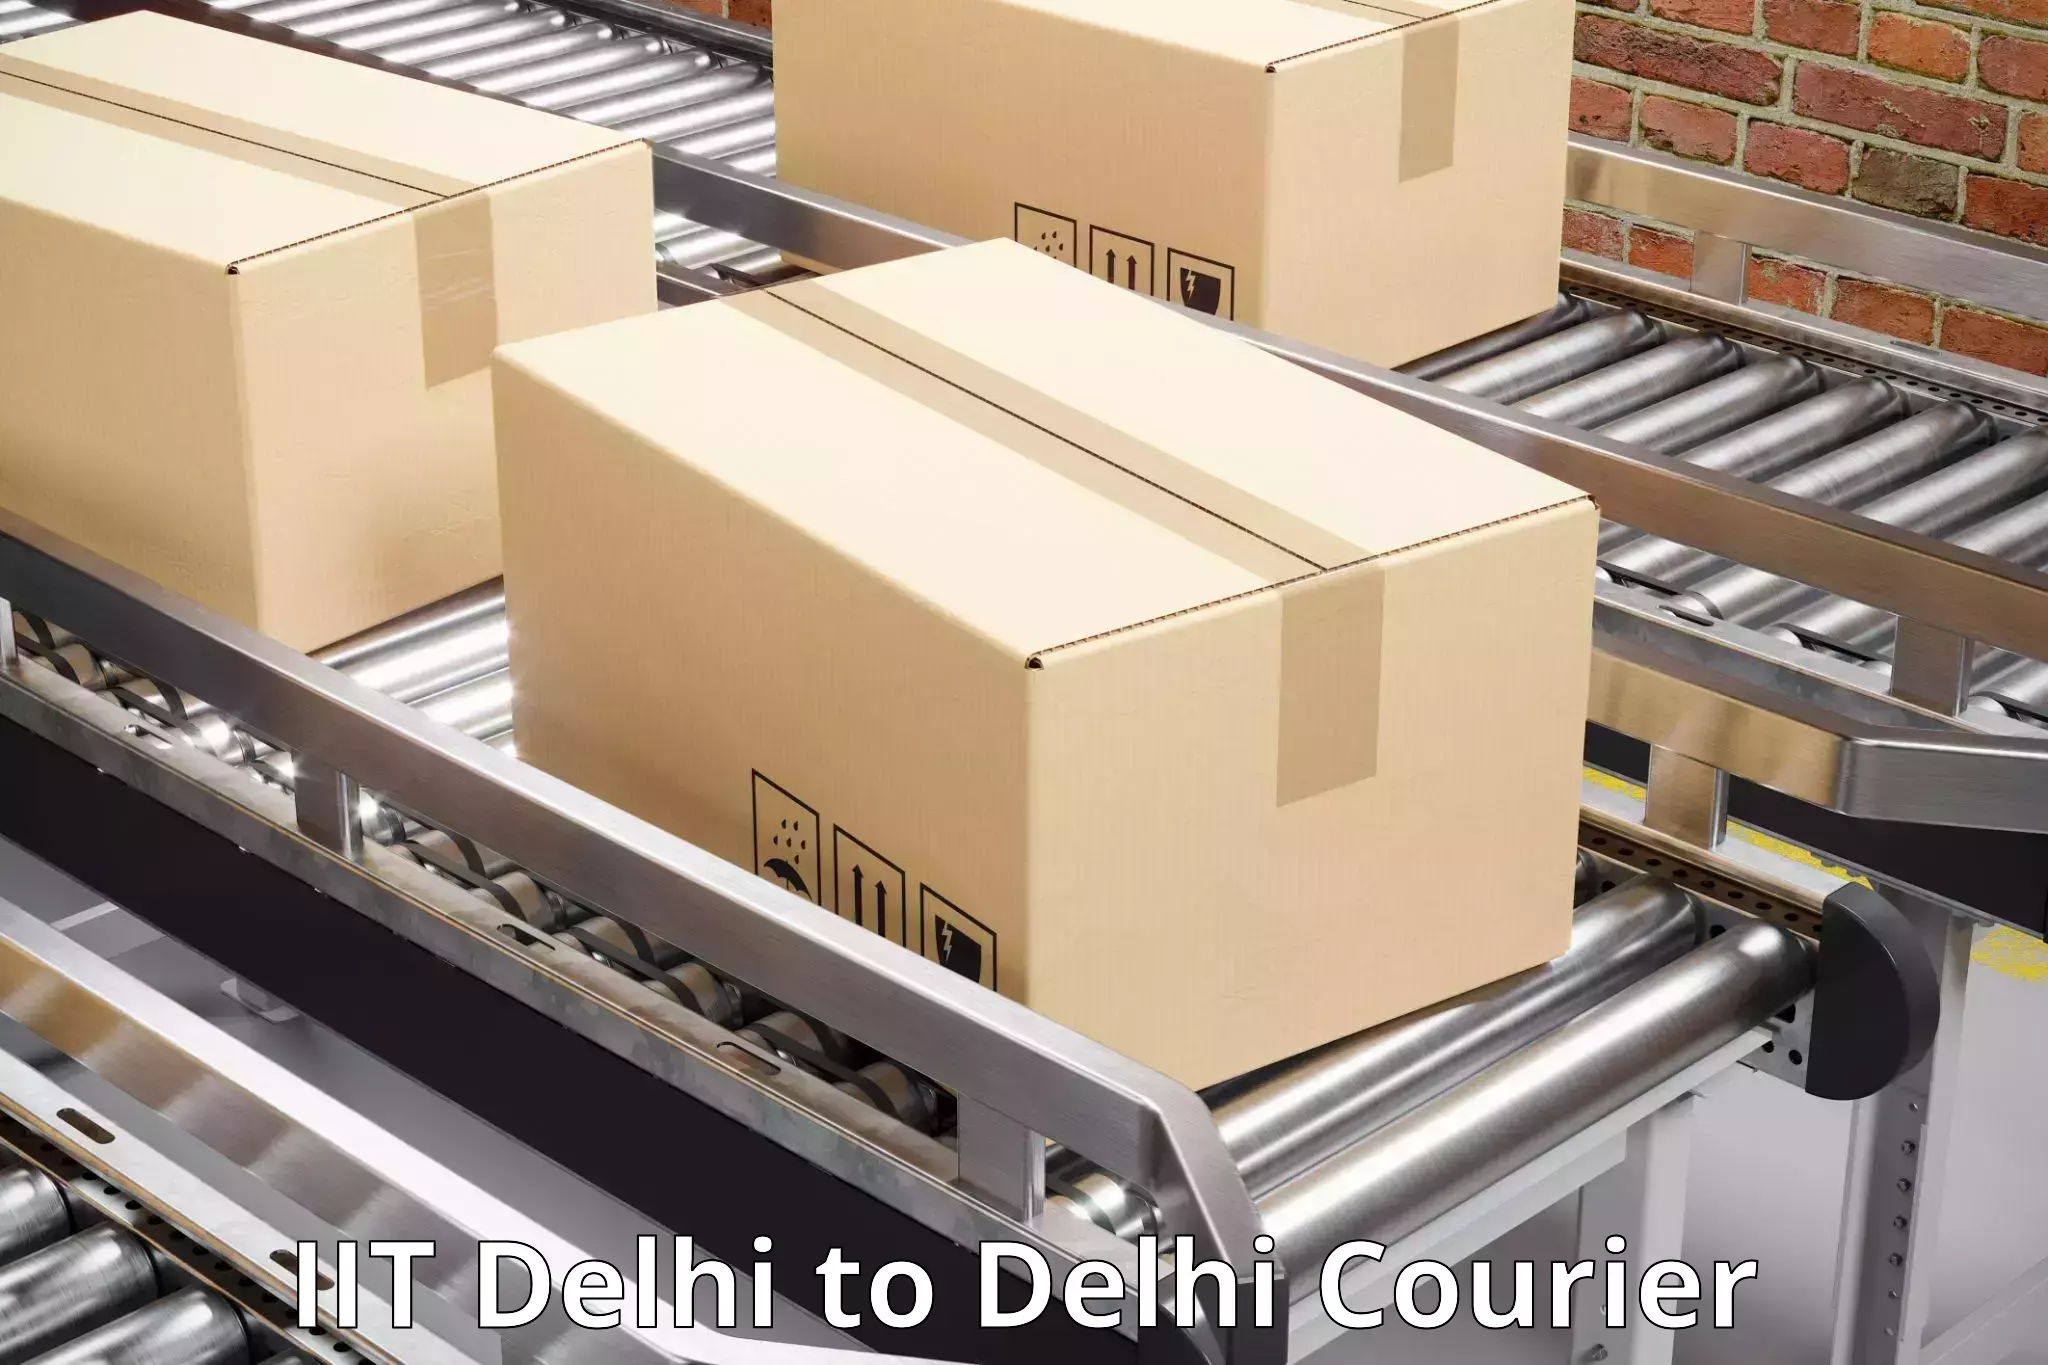 On-call courier service IIT Delhi to NCR